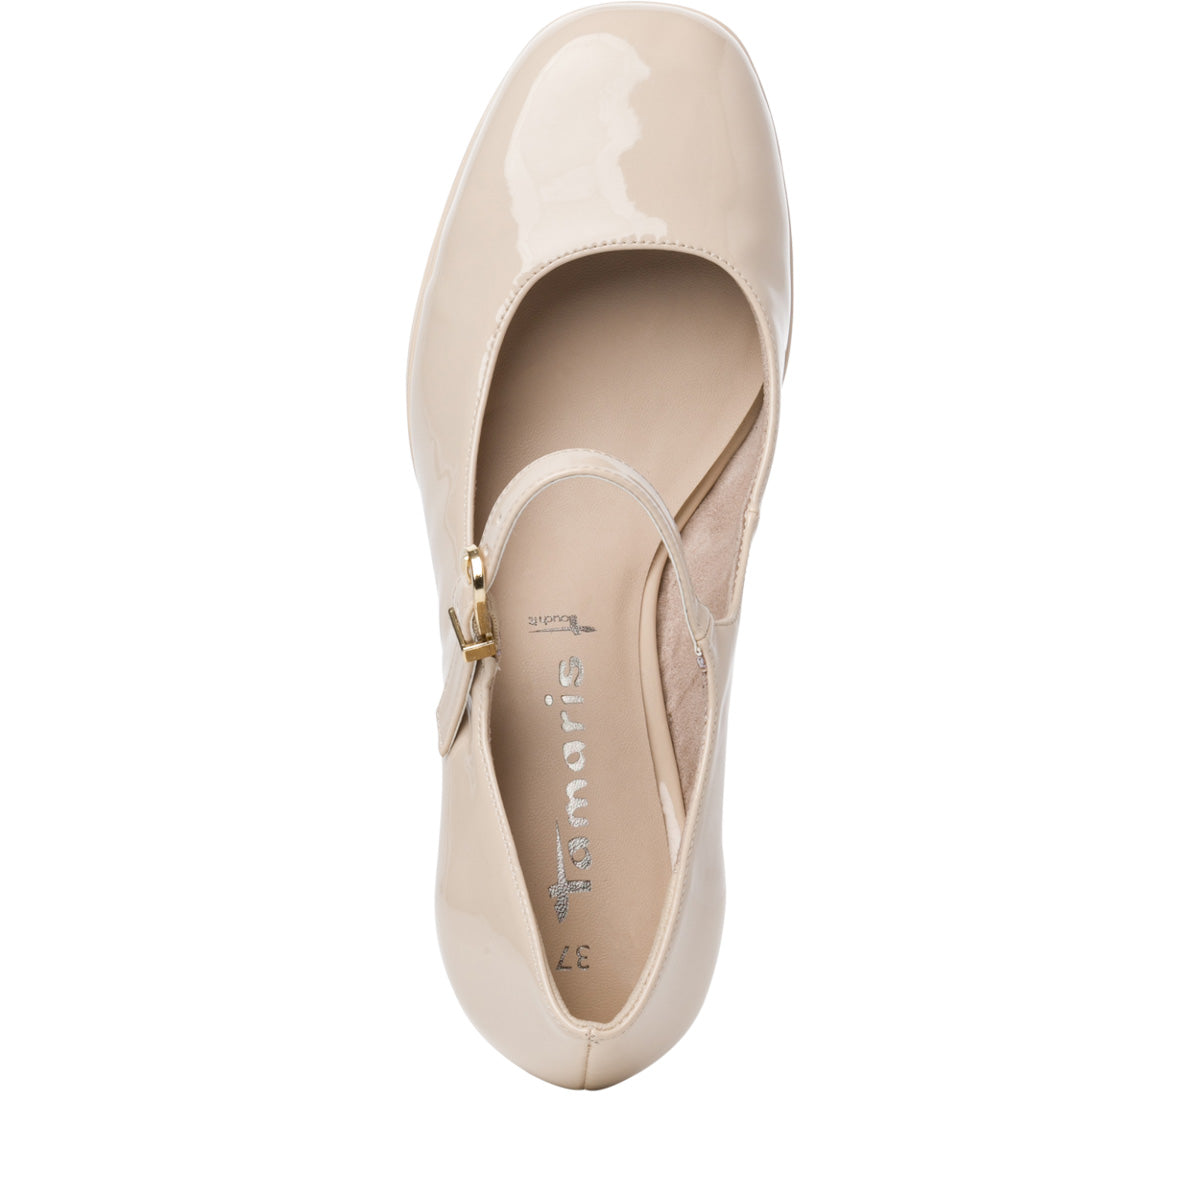 Chic Show Mary-Jane Pumps in Ivory Patent